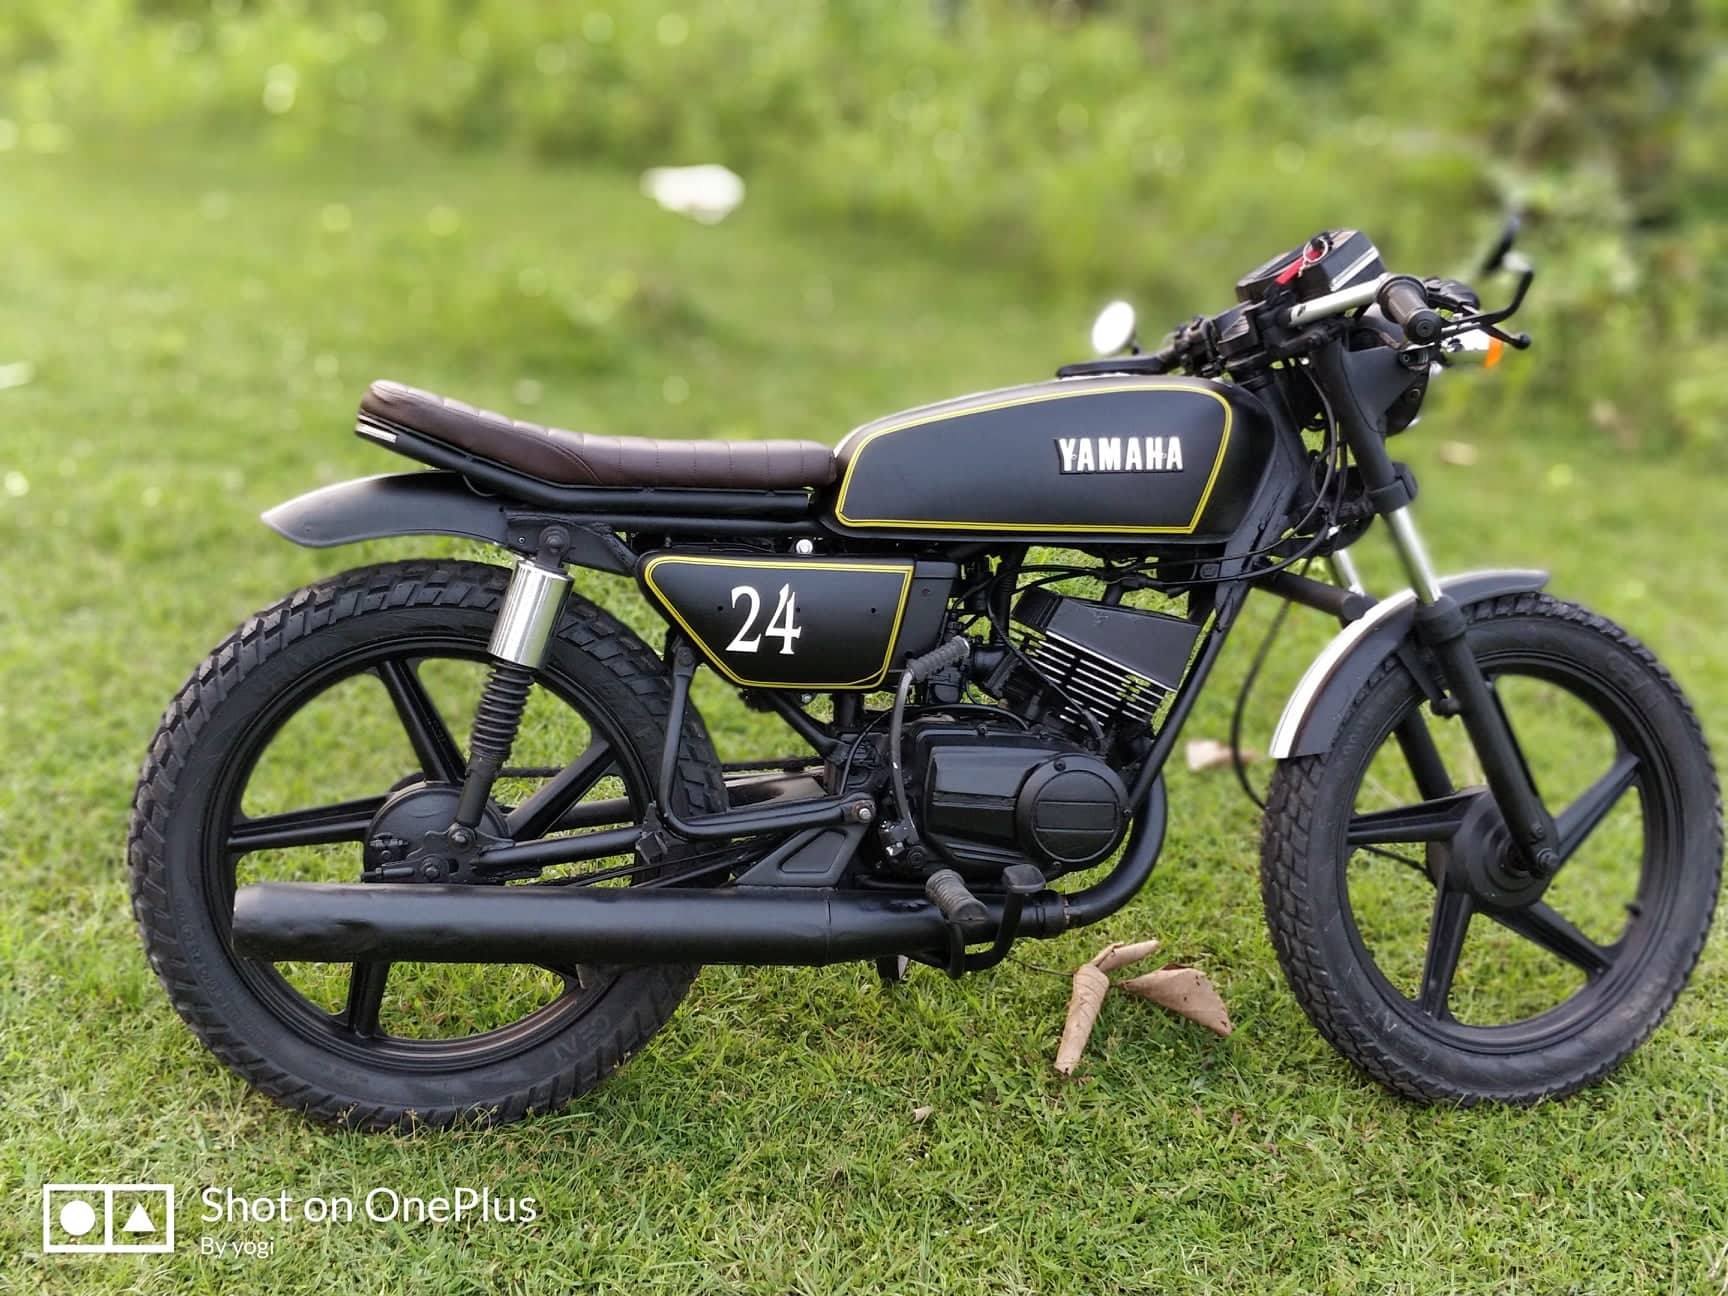 Modified Yamaha RX 100 Motorcycles in India